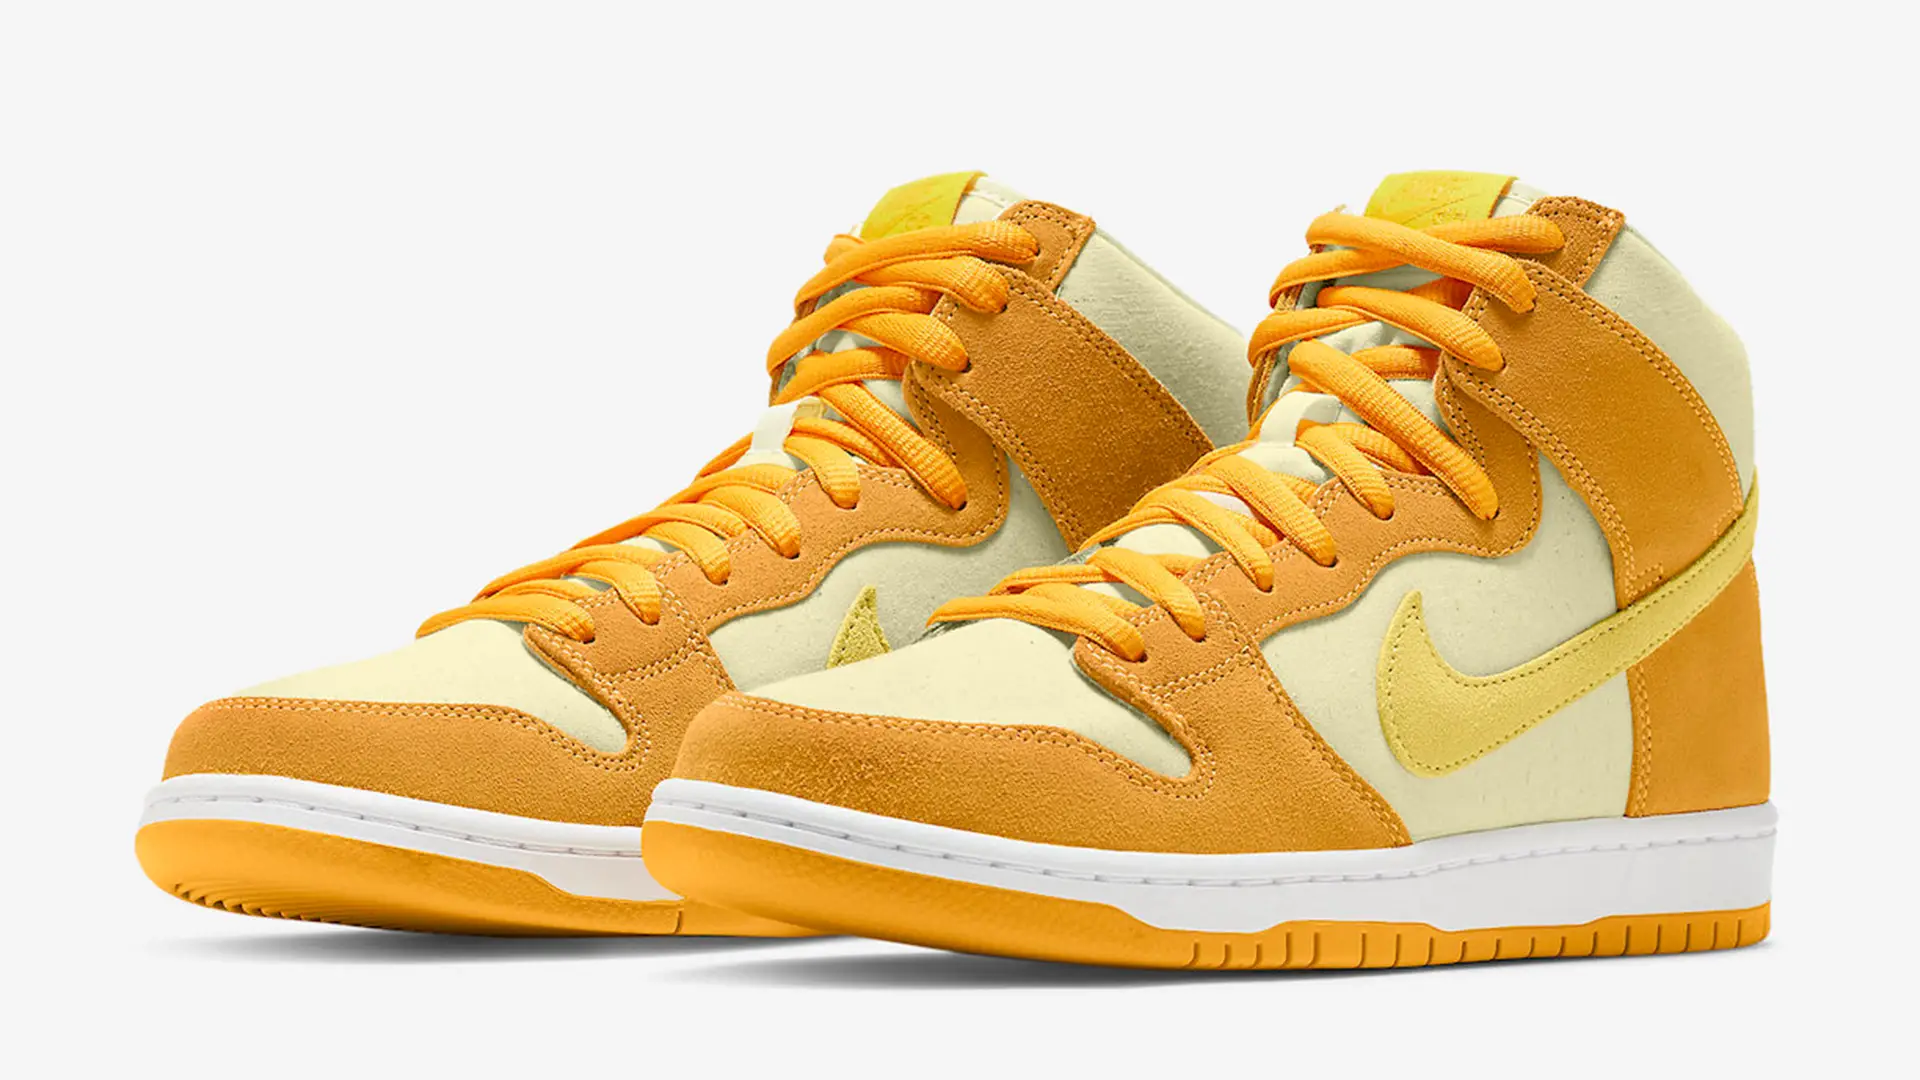 Here's an Official Look at the Nike SB Dunk High 